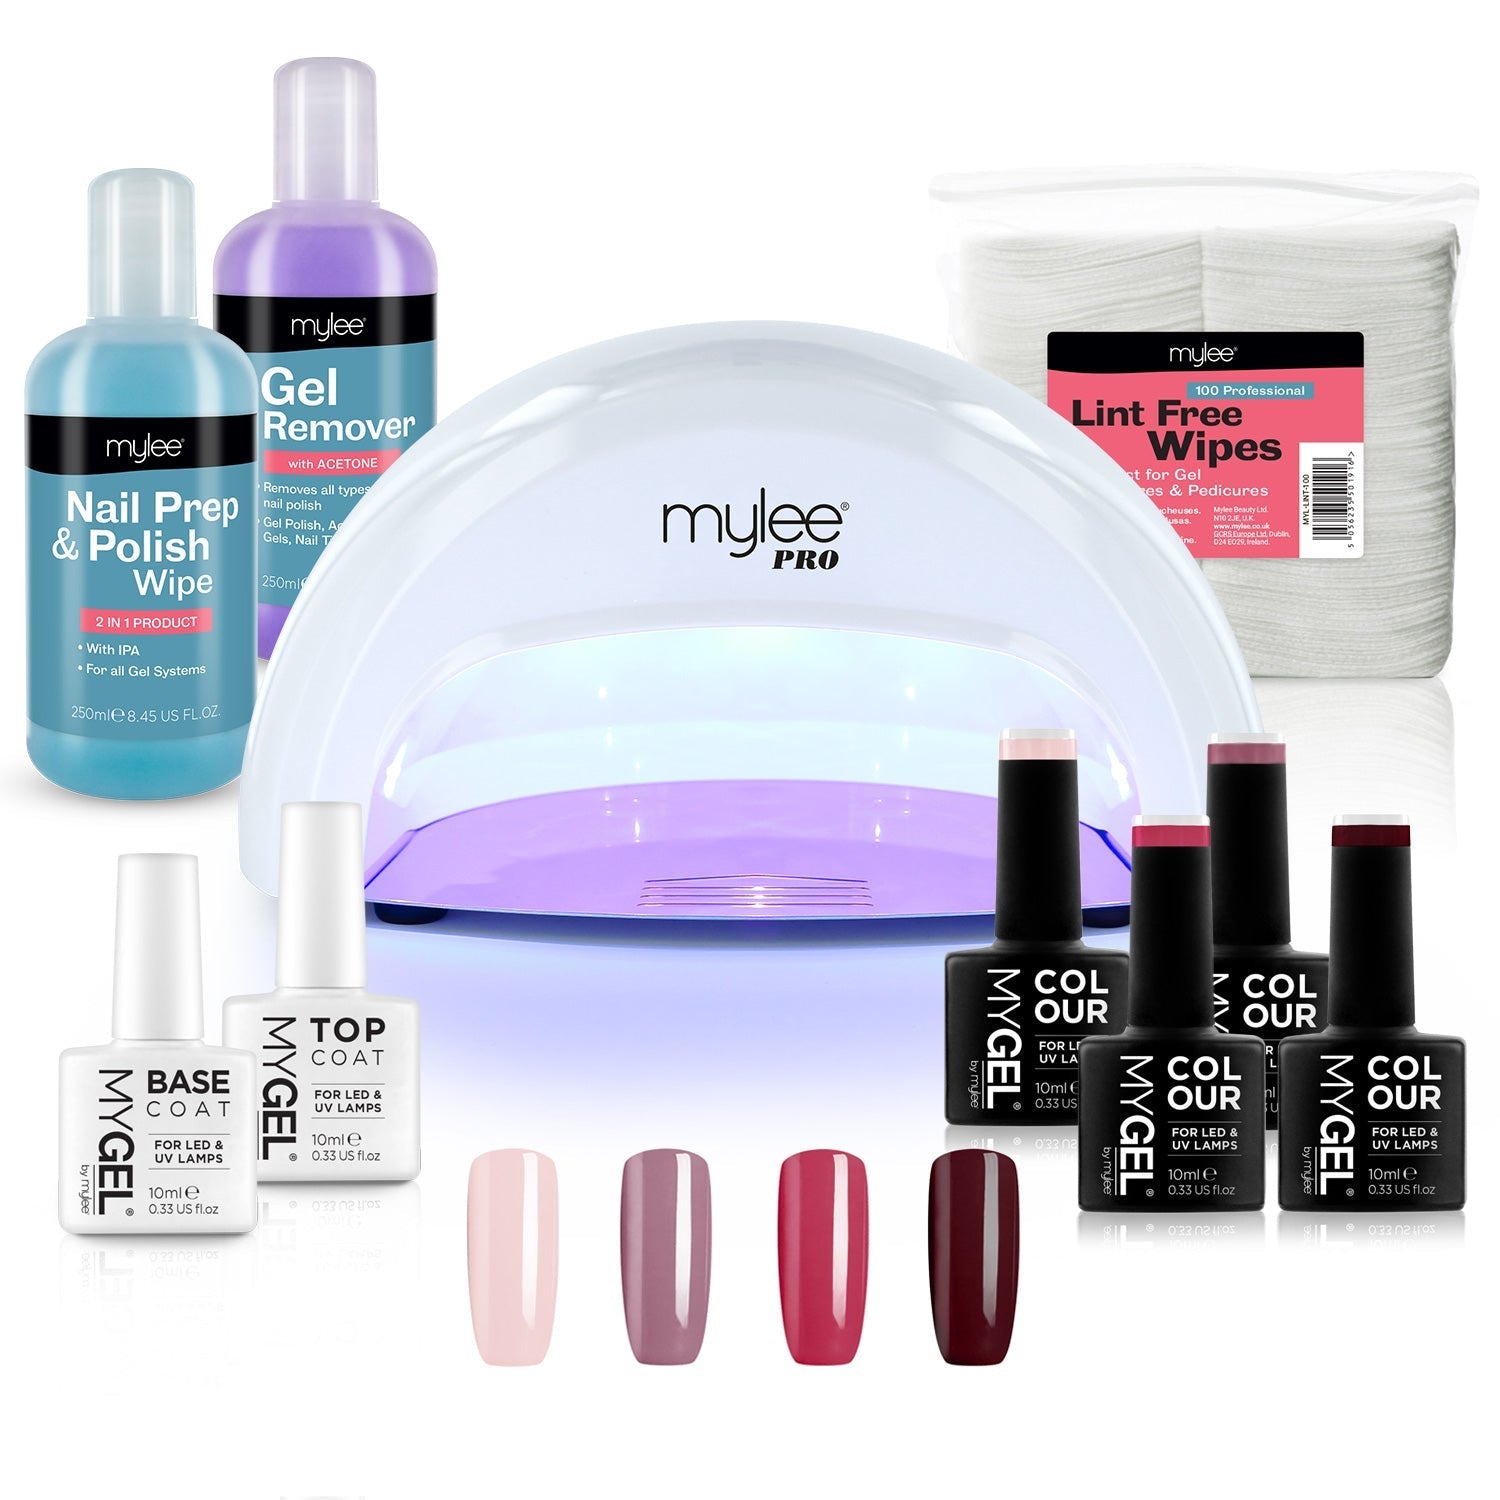 Mylee White Convex Curing Lamp Kit w/ Gel Nail Polish Essentials (Worth £99.50) - Long Lasting At Home Manicure/Pedicure